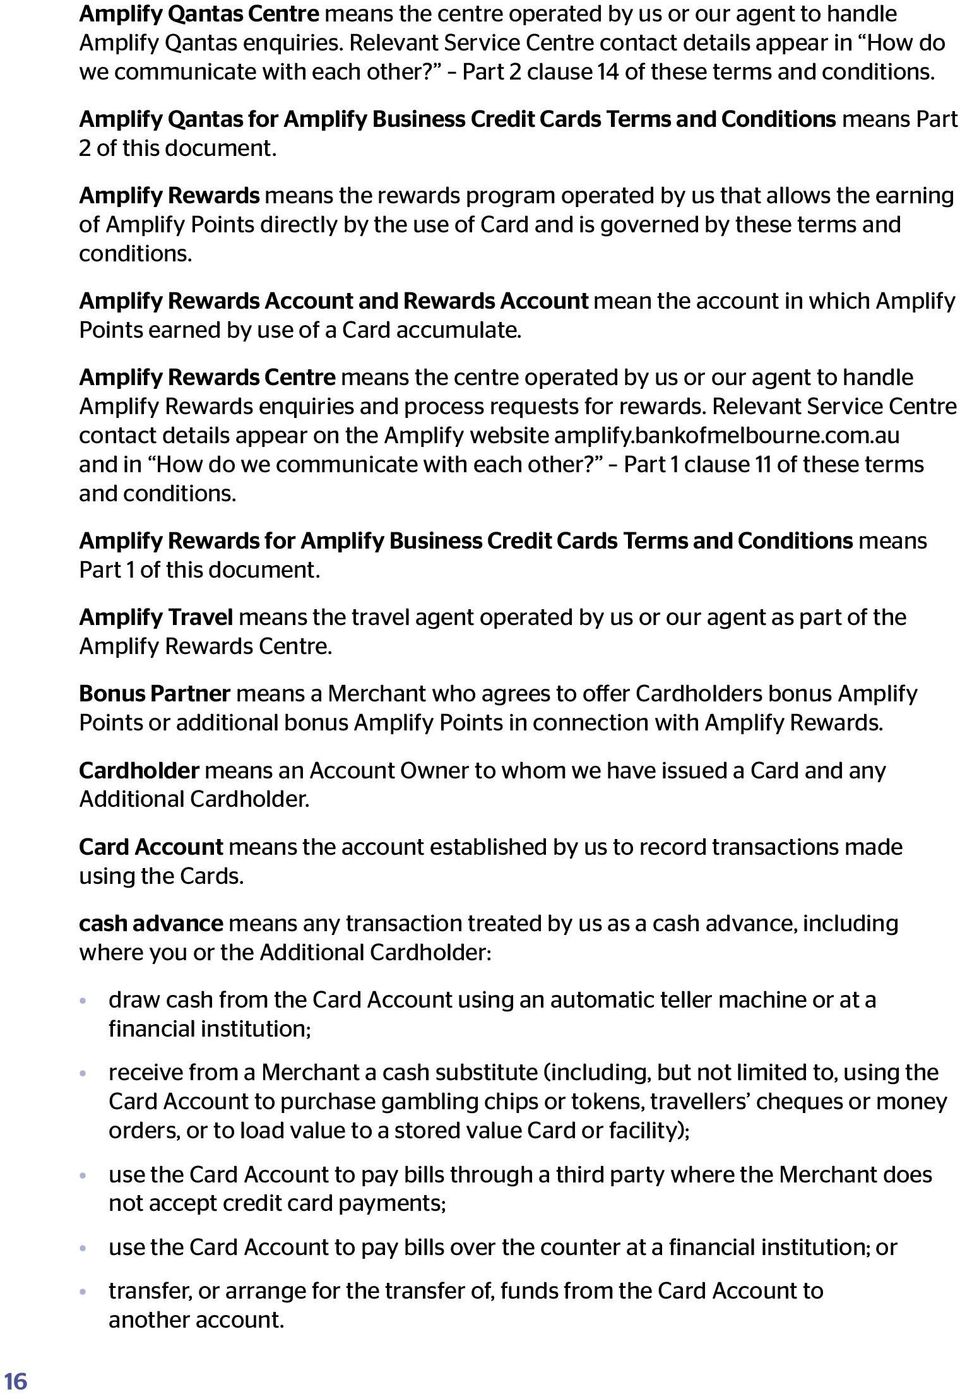 Amplify Rewards means the rewards program operated by us that allows the earning of Amplify Points directly by the use of Card and is governed by these terms and conditions.